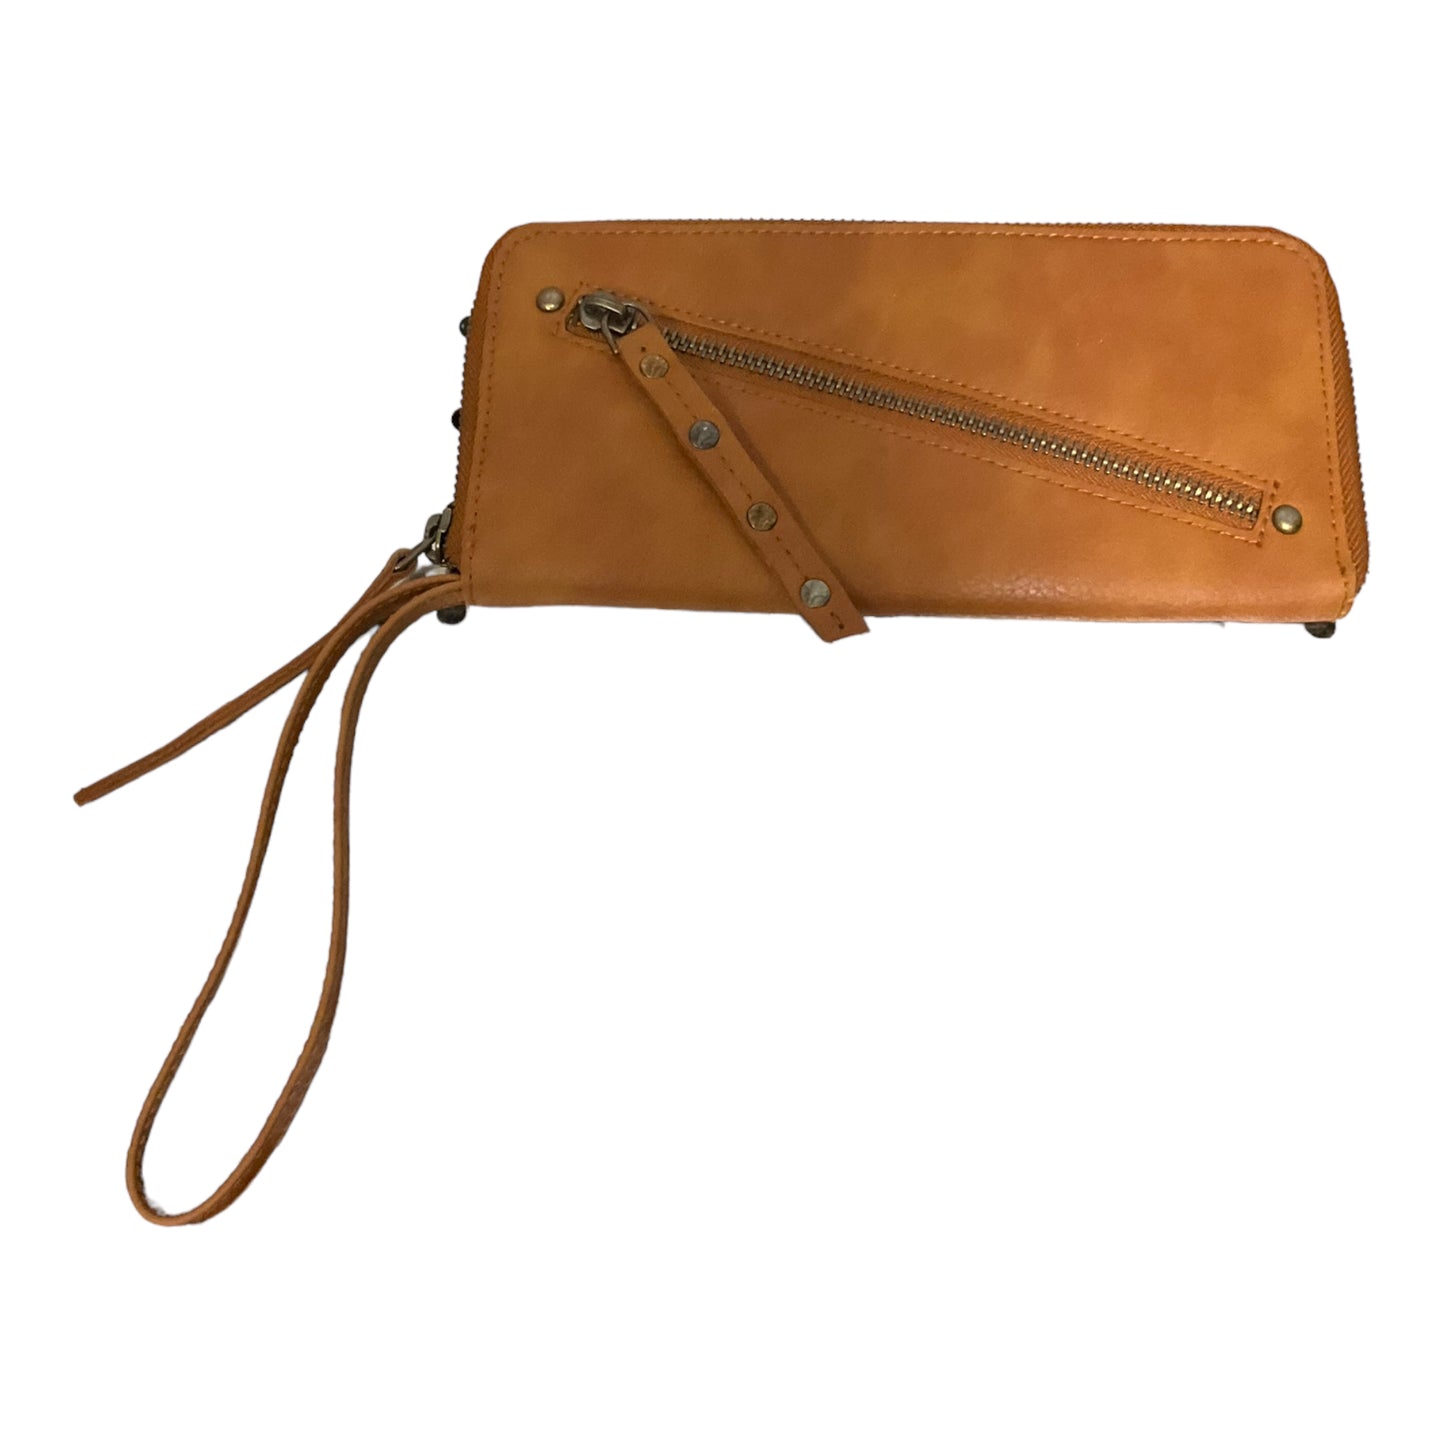 Wristlet By We The Free  Size: Medium